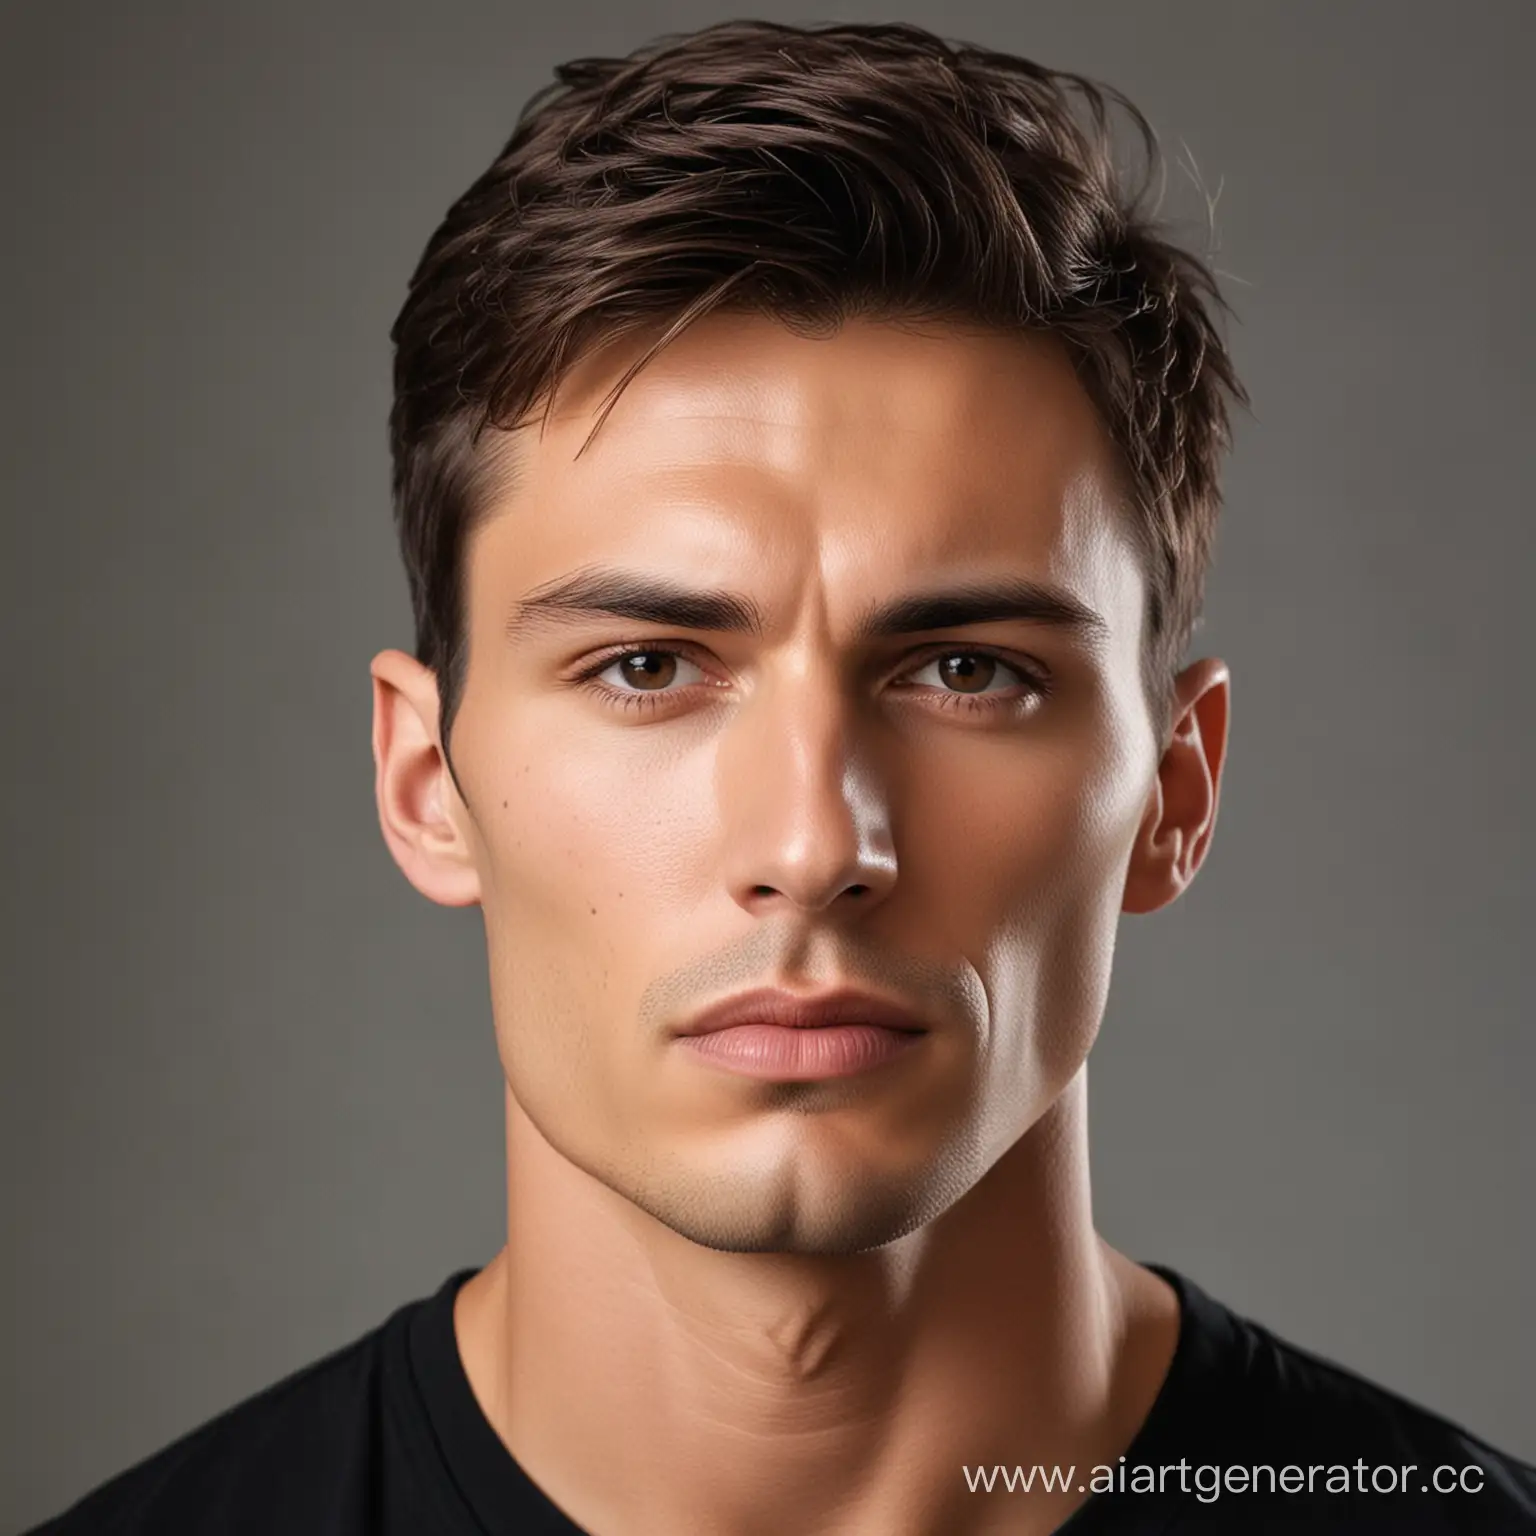 Masculine-Man-with-Defined-Cheekbones-Striking-Facial-Features